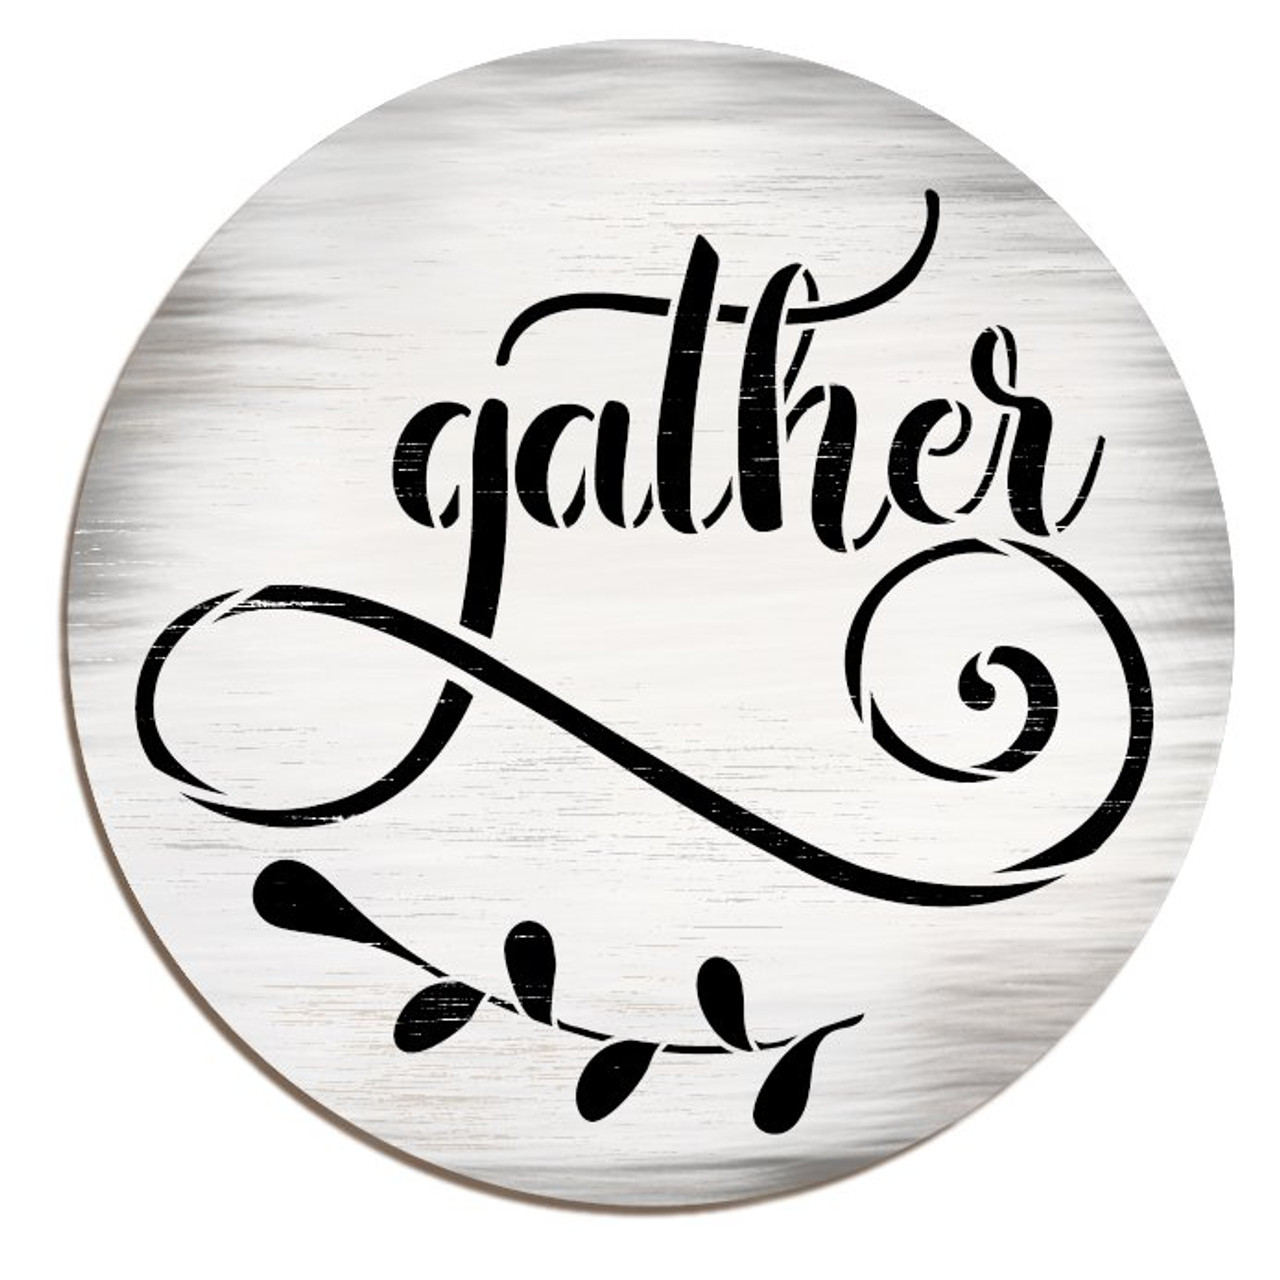 Gather Script Round Stencil by StudioR12 | DIY Family Farmhouse Home & Kitchen Decor | Craft & Paint Rustic Wood Signs | Select Size